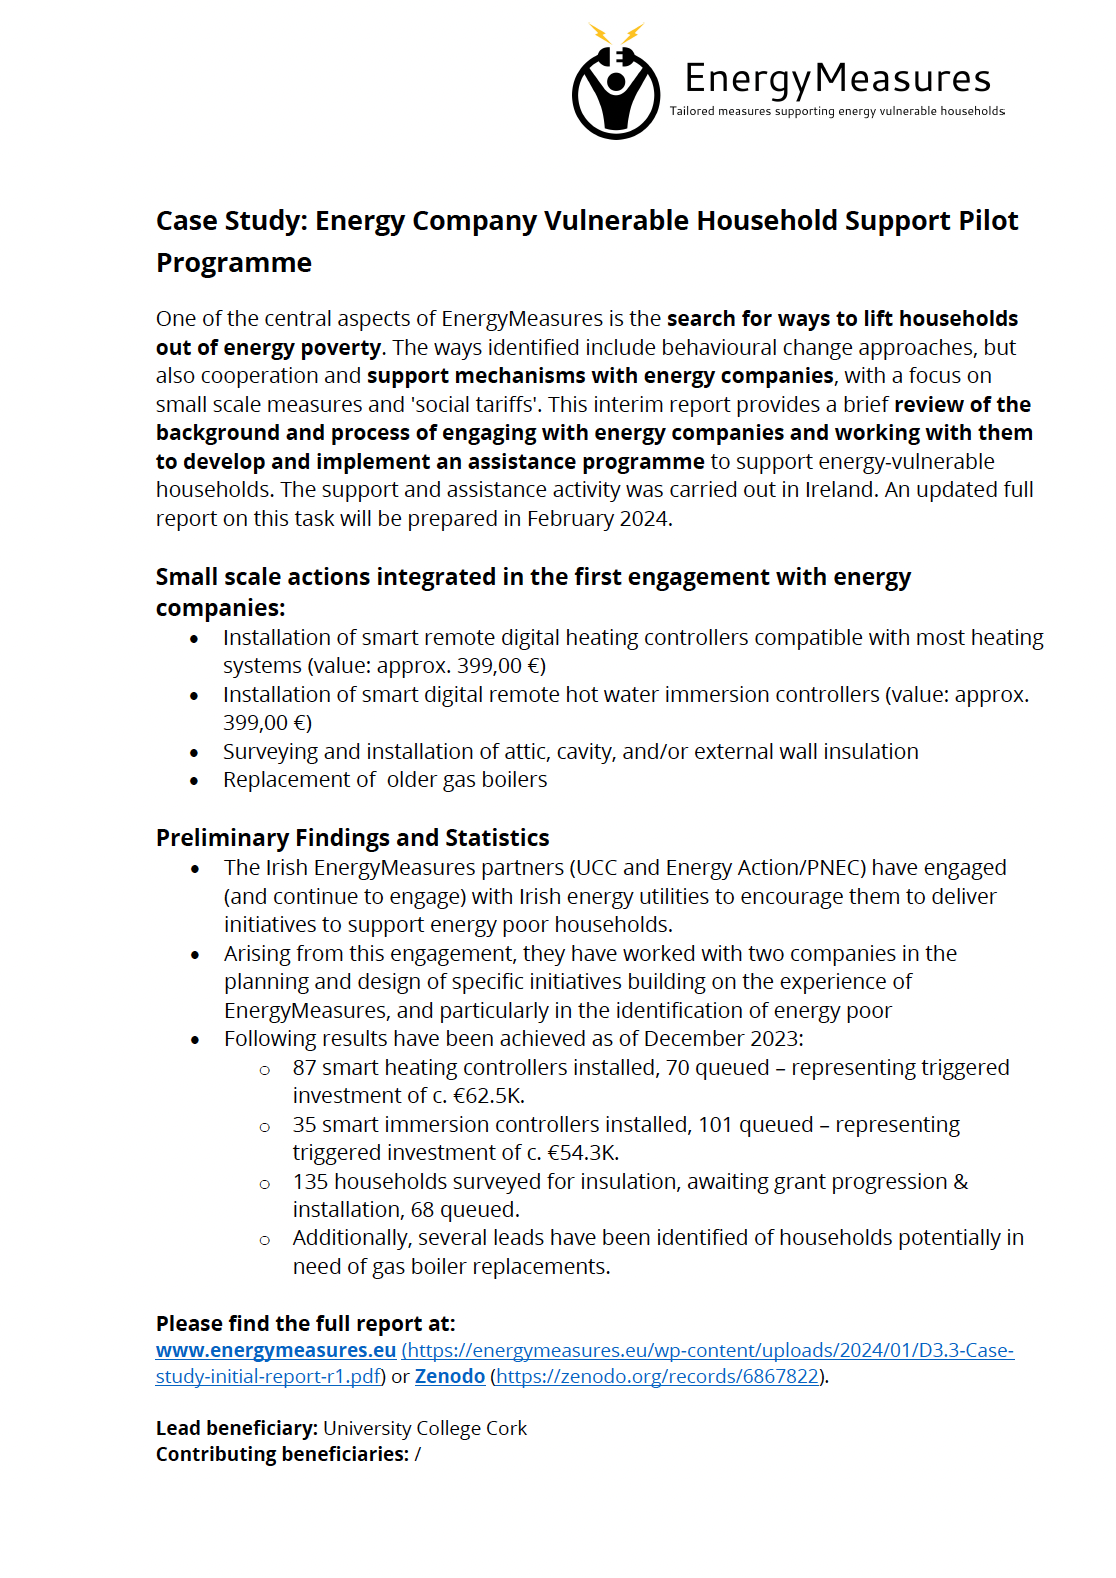 Case Study: Energy Company Vulnerable Household Support Pilot Programme